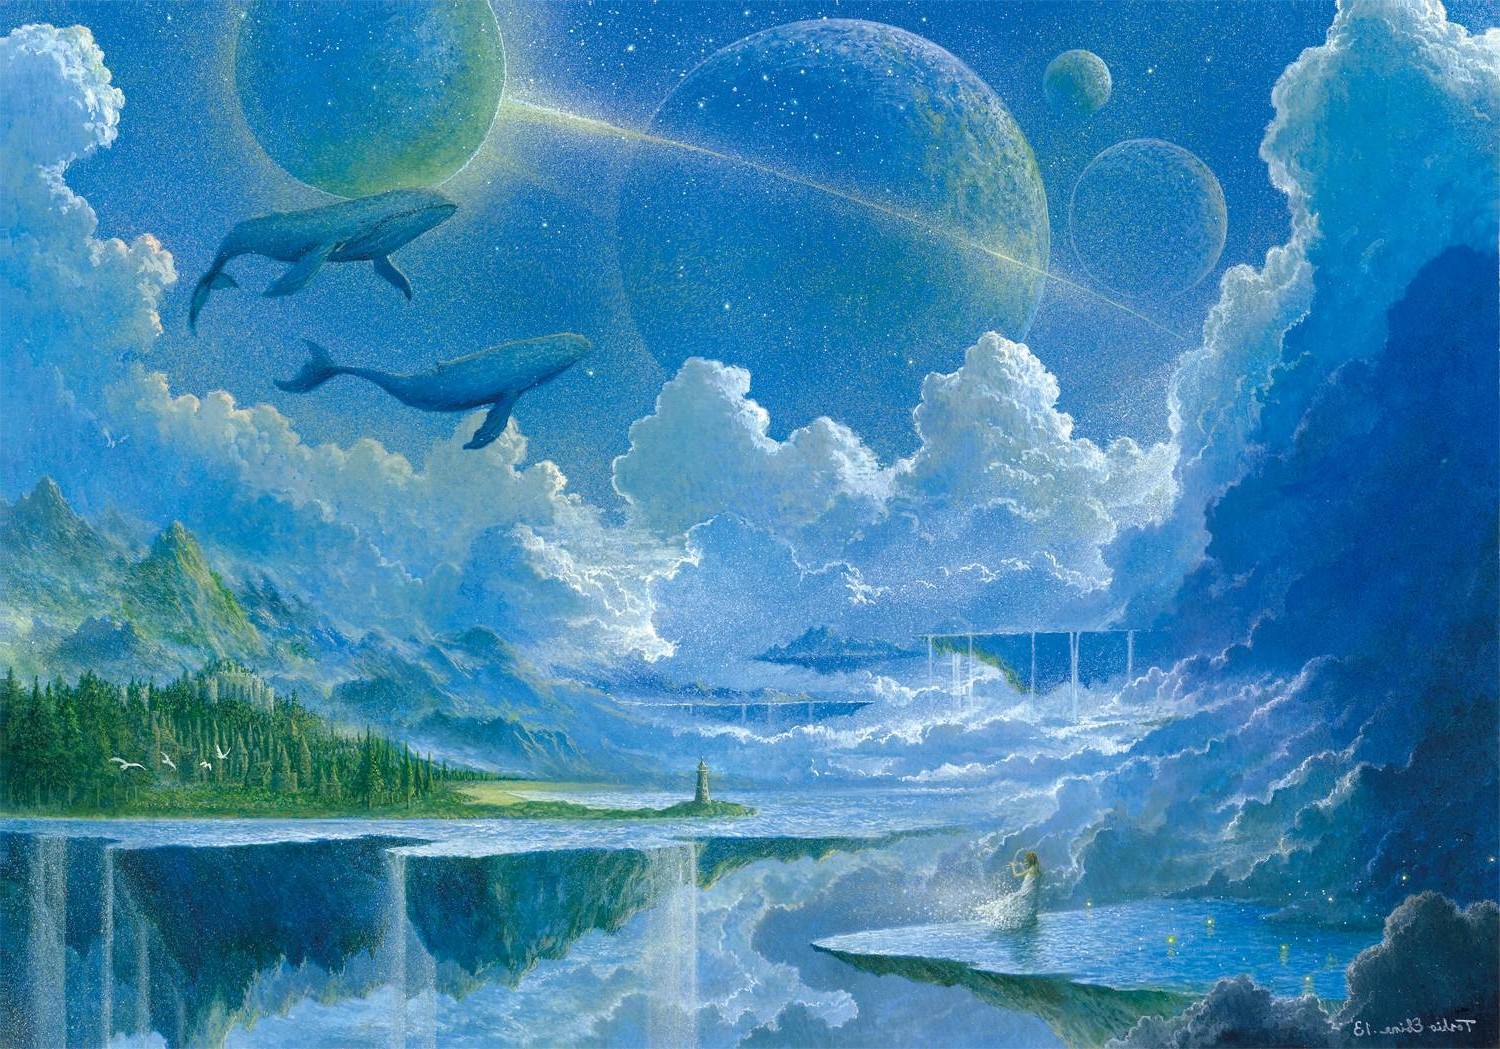 fantasy Art, Floating Island, Waterfall, Whale, Planet, Clouds Wallpaper